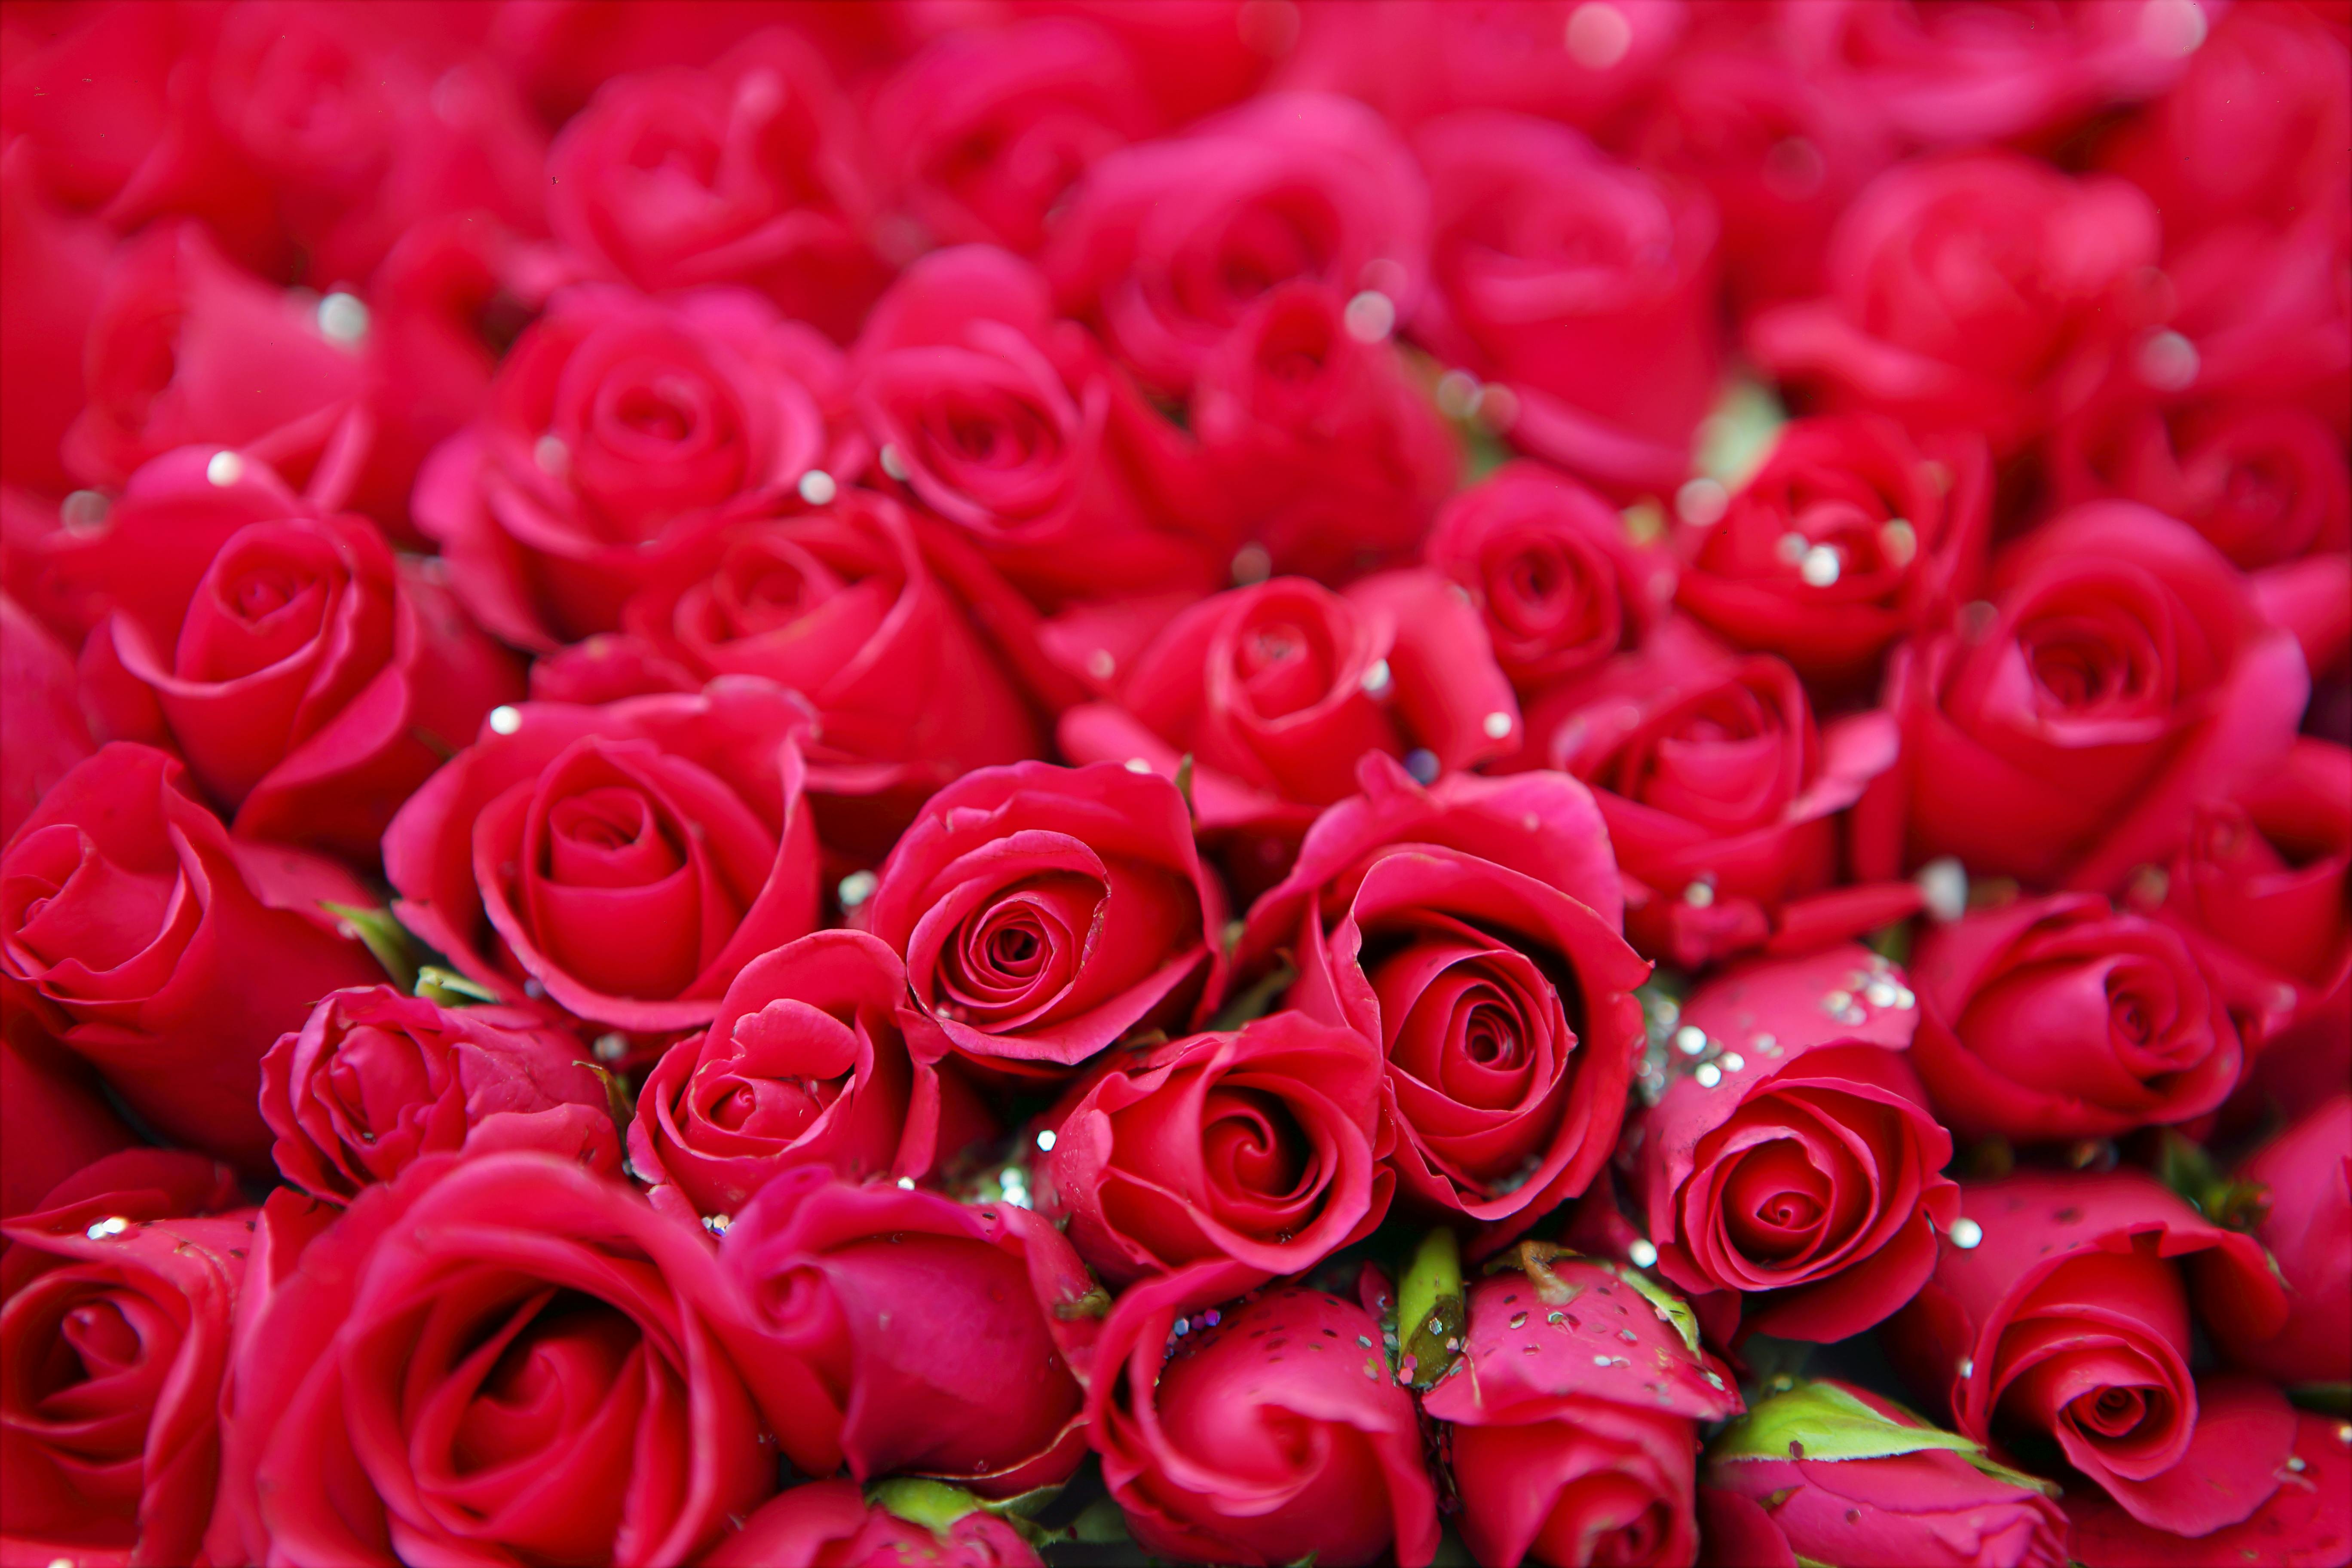 Rose Pictures Wallpaper For Phone  Best HD Wallpapers  Rose flower hd Rose  flower pictures Red rose flower